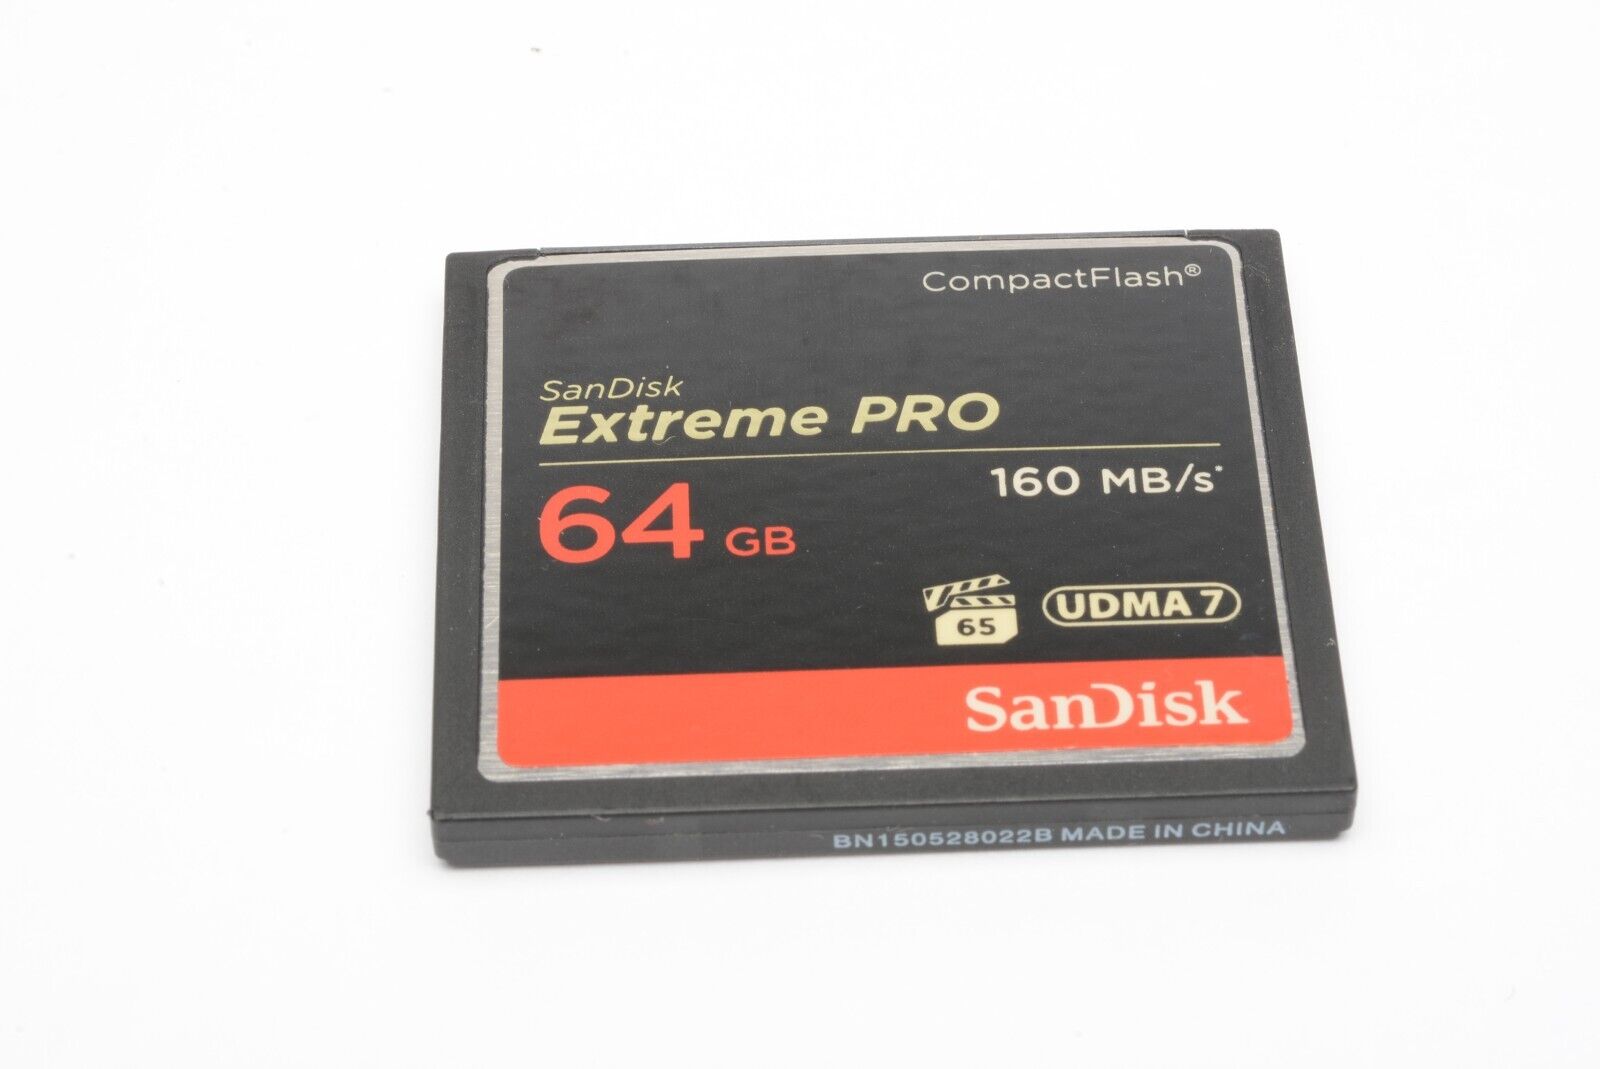 EXC++ SANDISK EXTREME PRO 64GB COMPACT FLASH MEMORY CARD UDMA 7